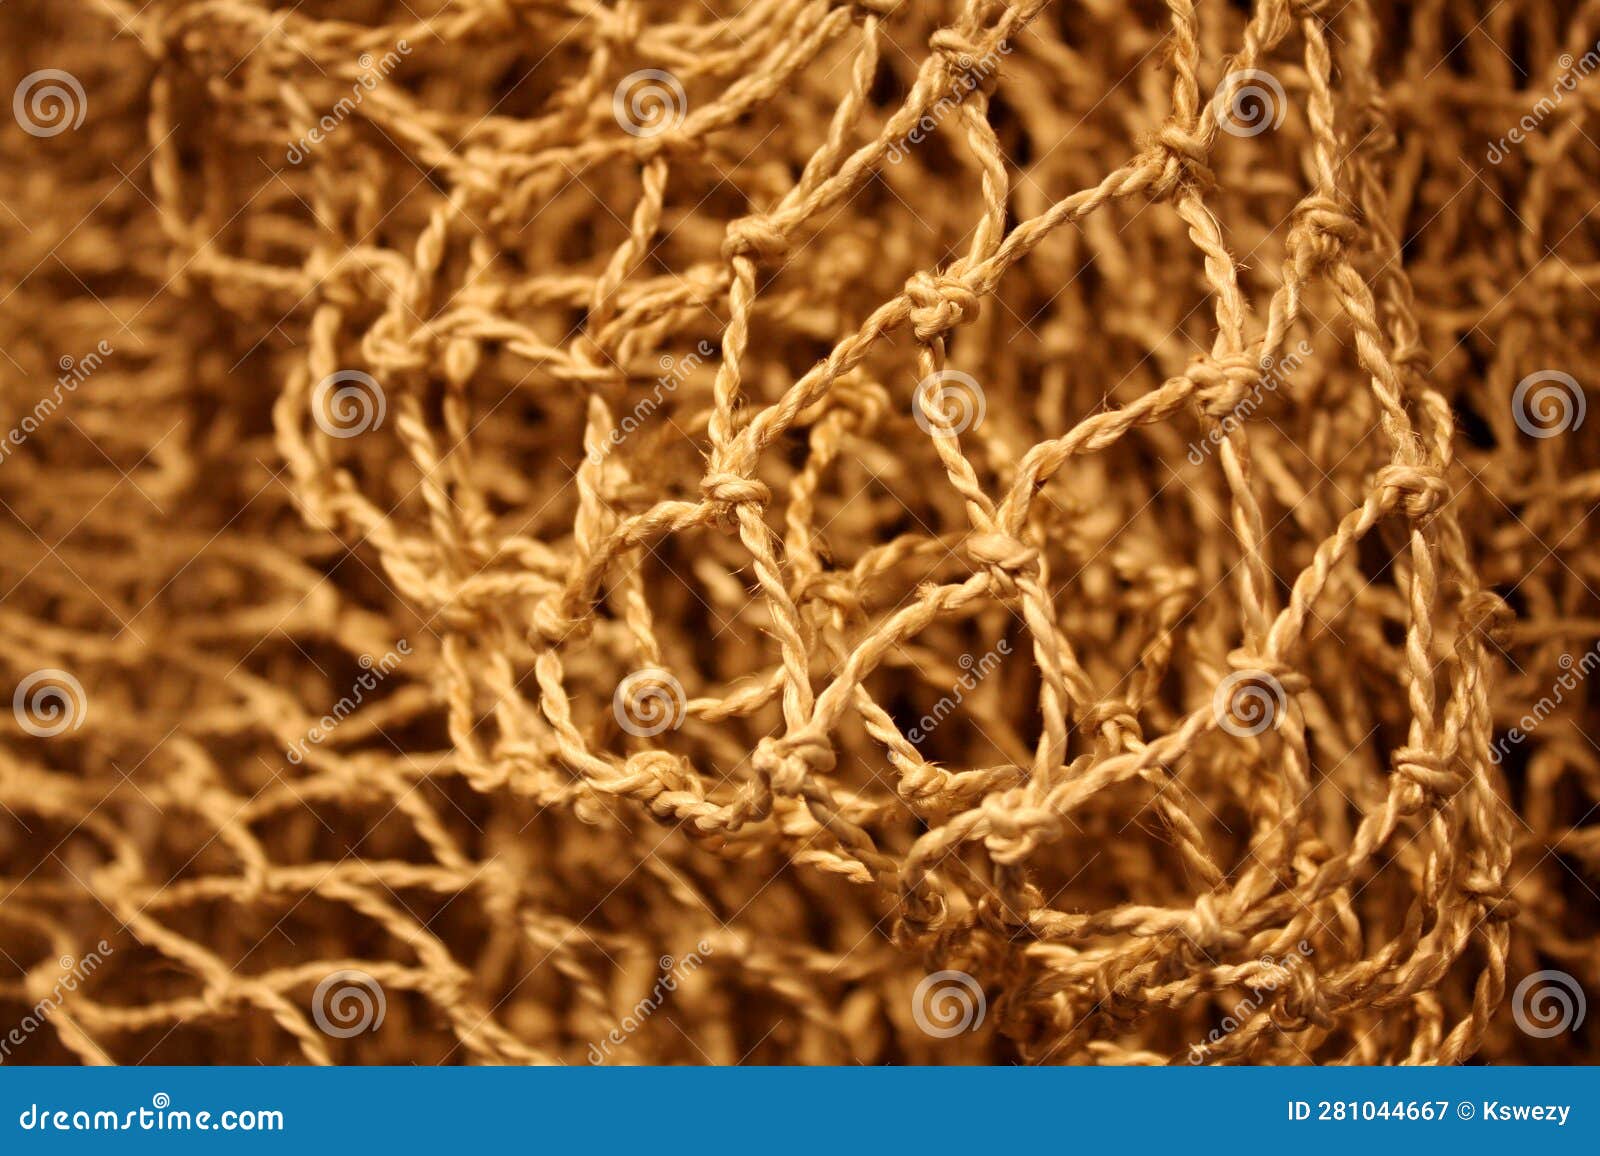 Close Up Detail of Knotted Rope Netting Stock Image - Image of